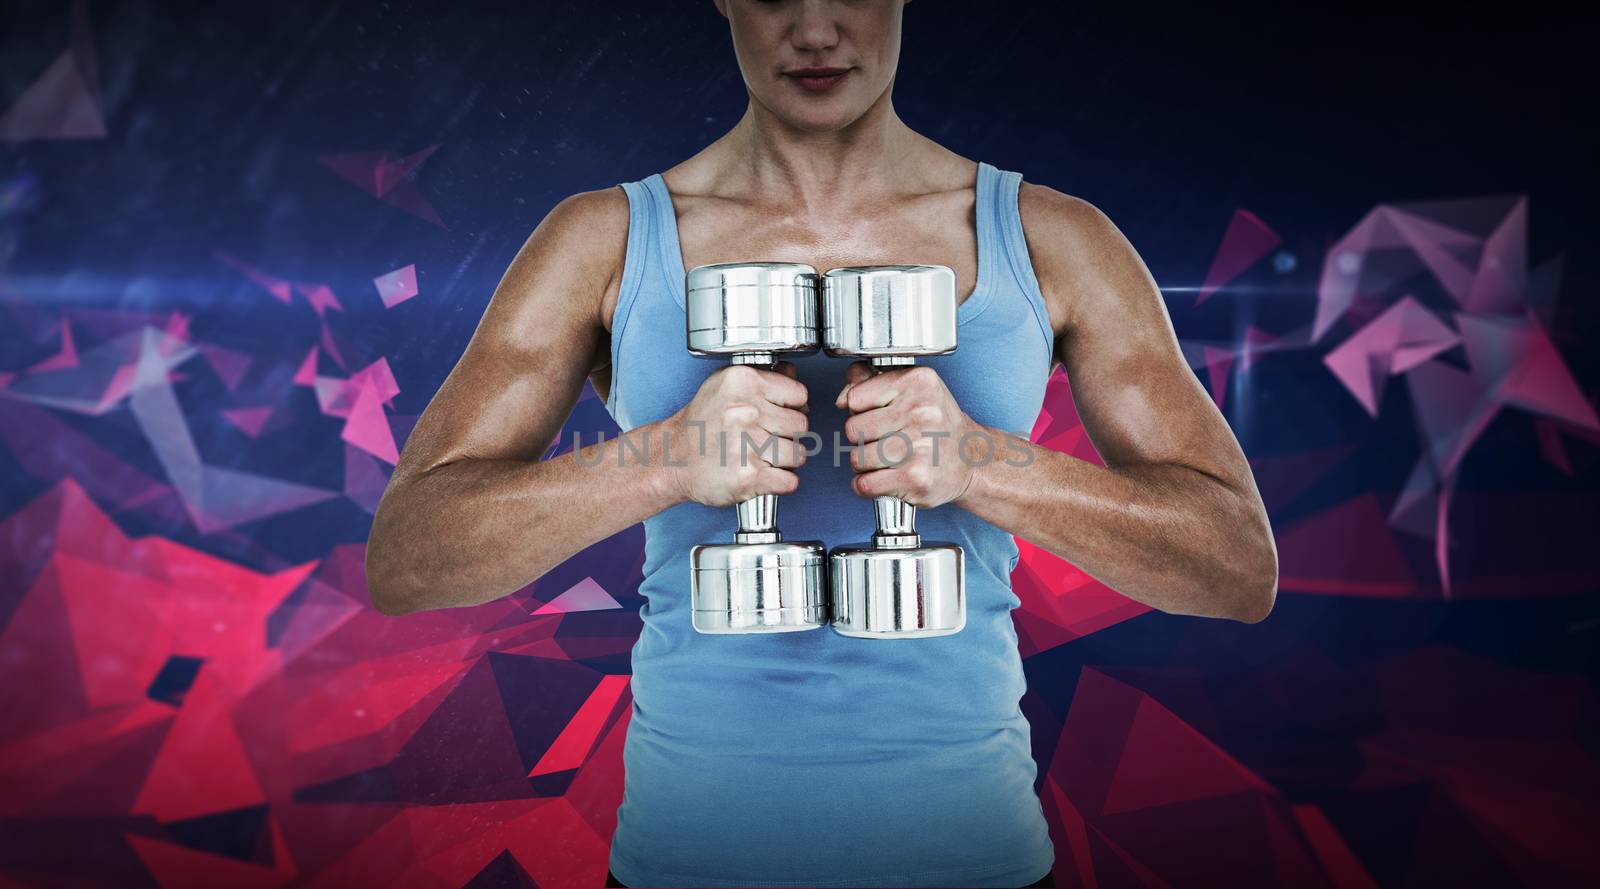 Muscular woman exercising with dumbbells  against dark abstract design